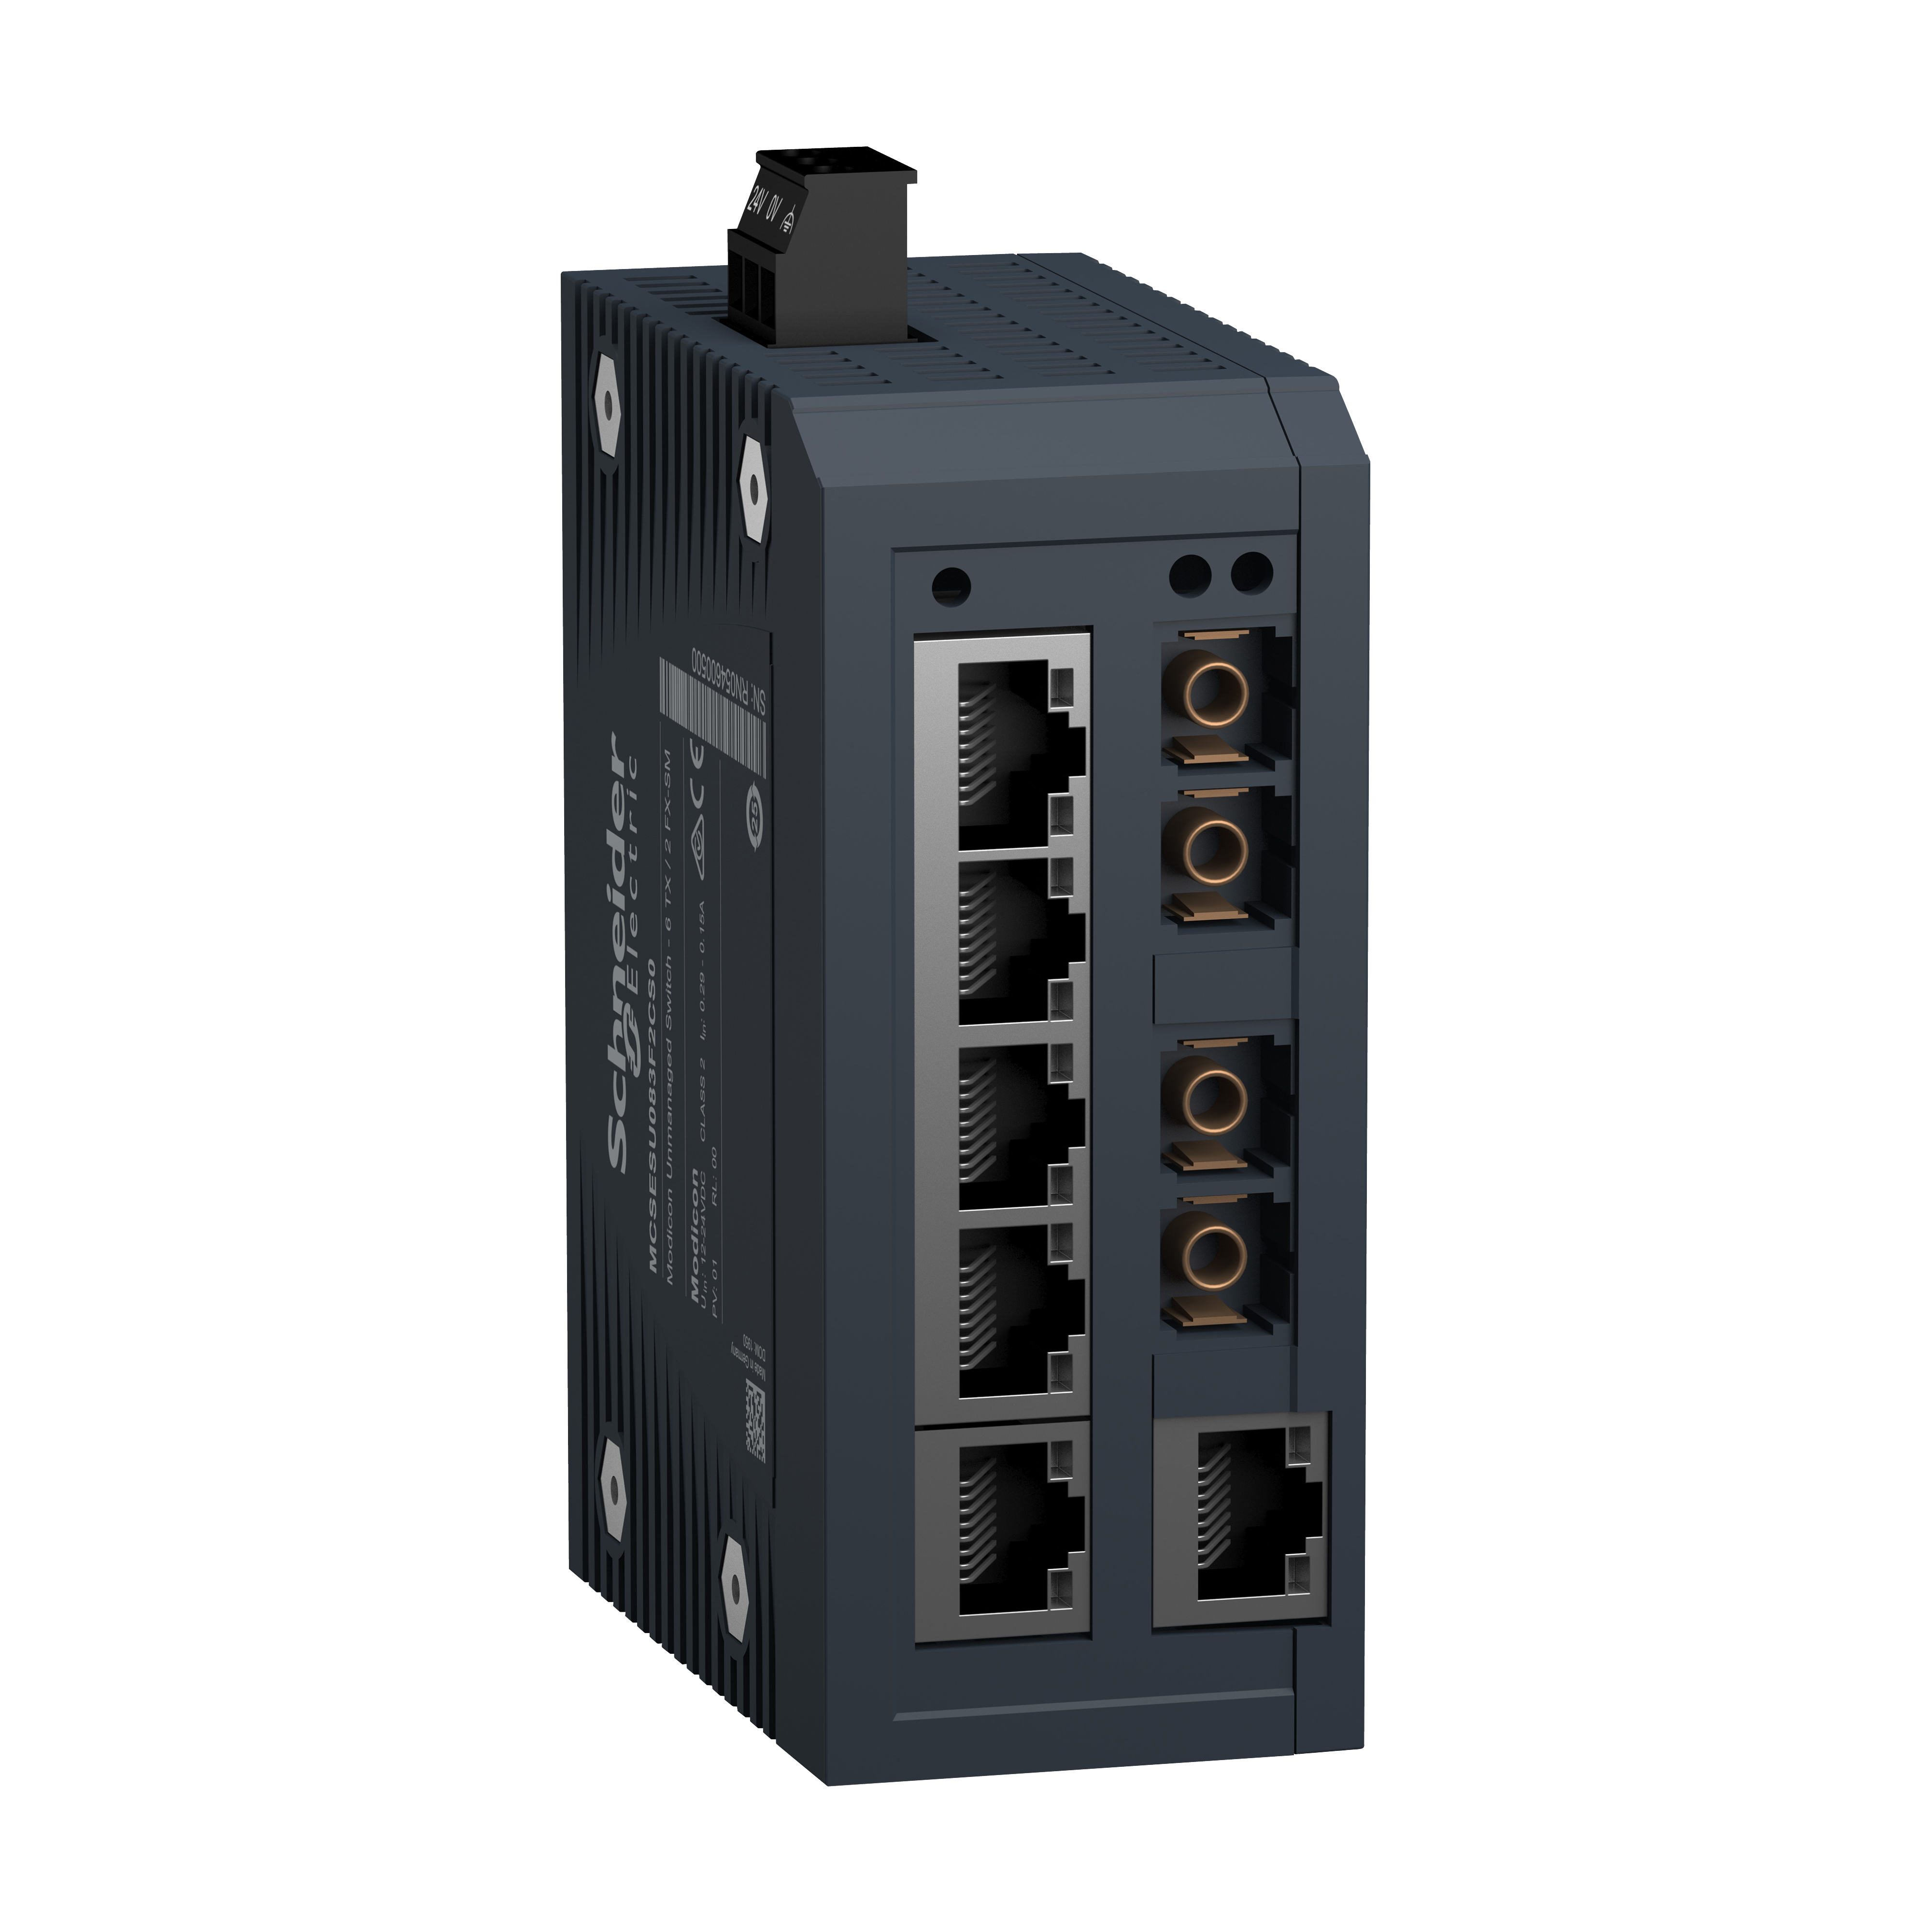 Modicon Standard Unmanaged Switch - 6 ports for copper + 2 ports for single-mode fiber optic